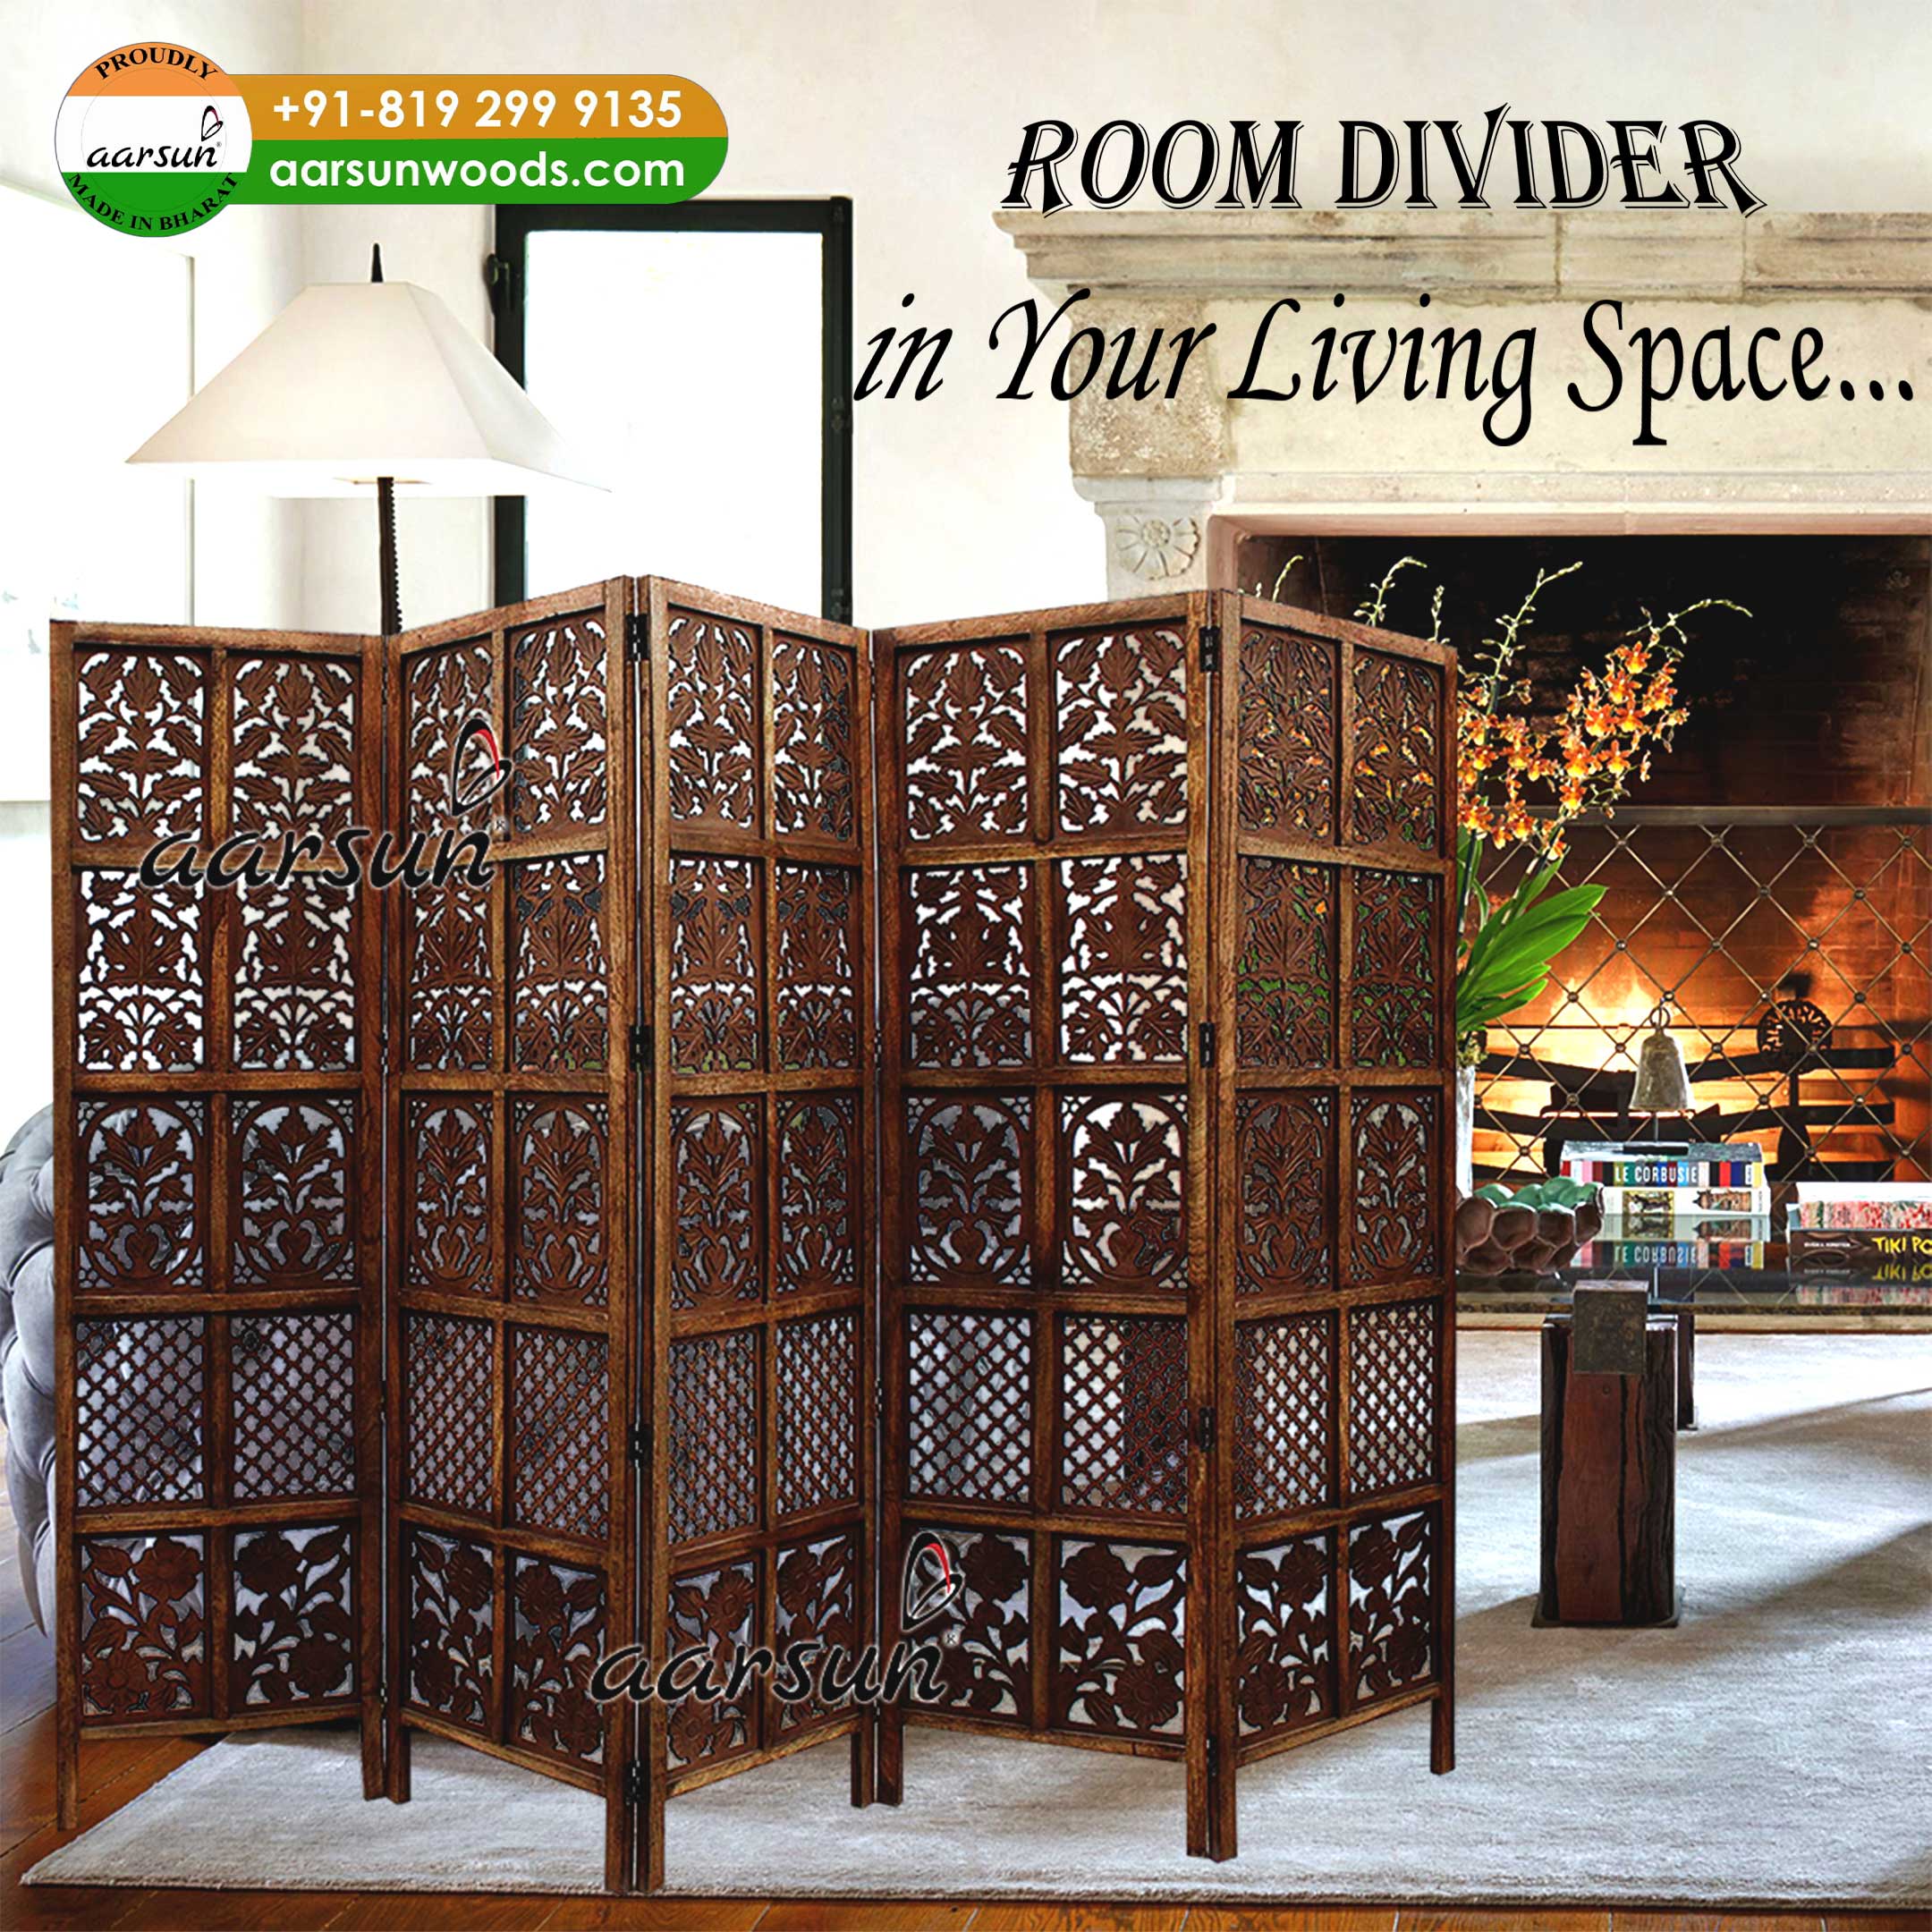 Room-divider-in-living-space